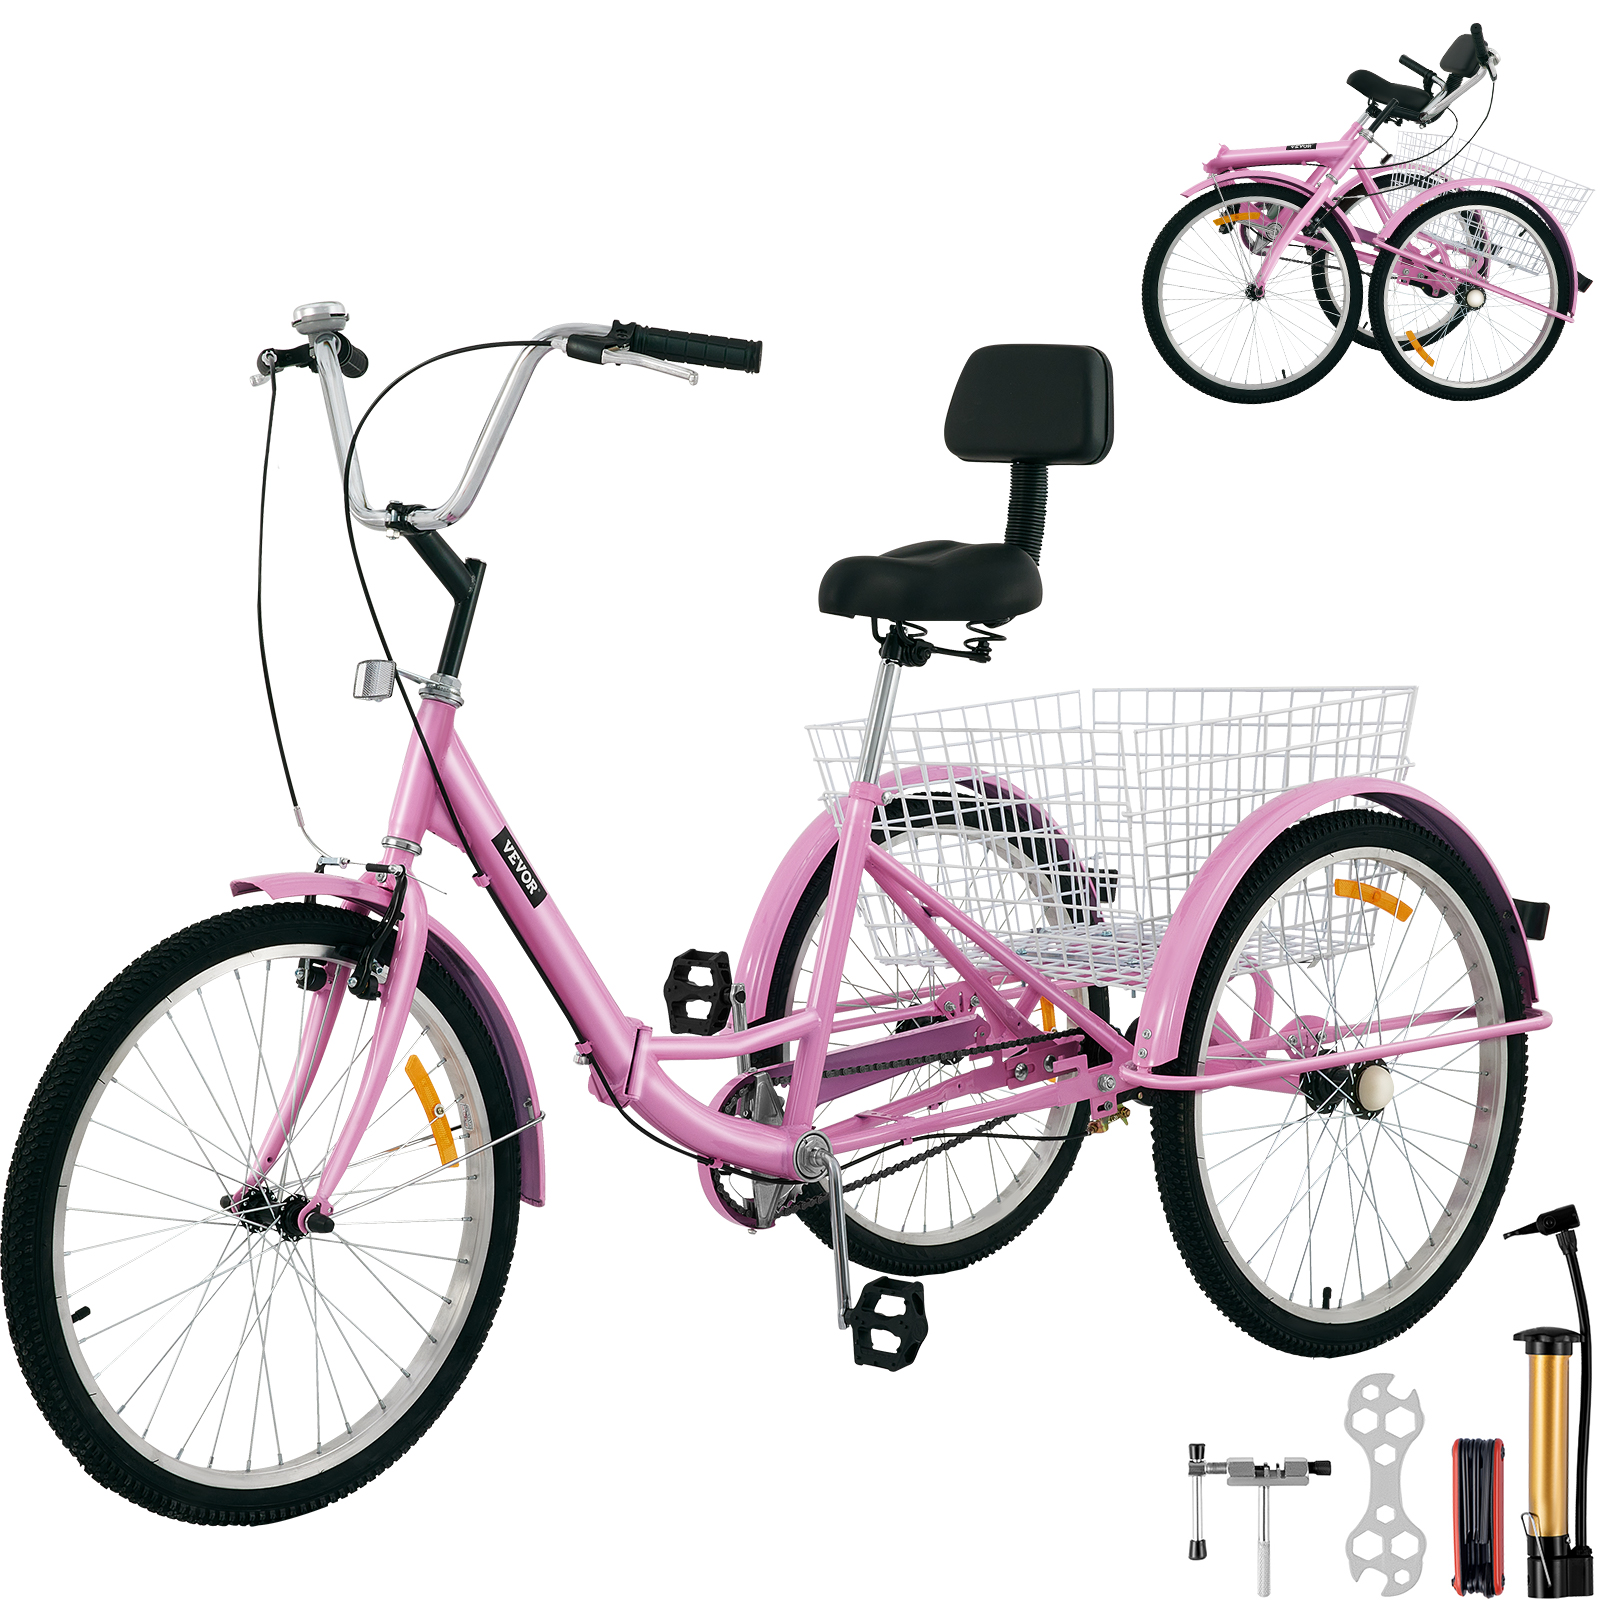 VEVOR Foldable Adult Tricycle 24 Wheels, 1-Speed Pink Trike, 3 Wheels Colorful Bike with Basket, Portable and Foldable Bicycle for Adults Exercise Shopping Picnic Outdoor Activities - image 1 of 9